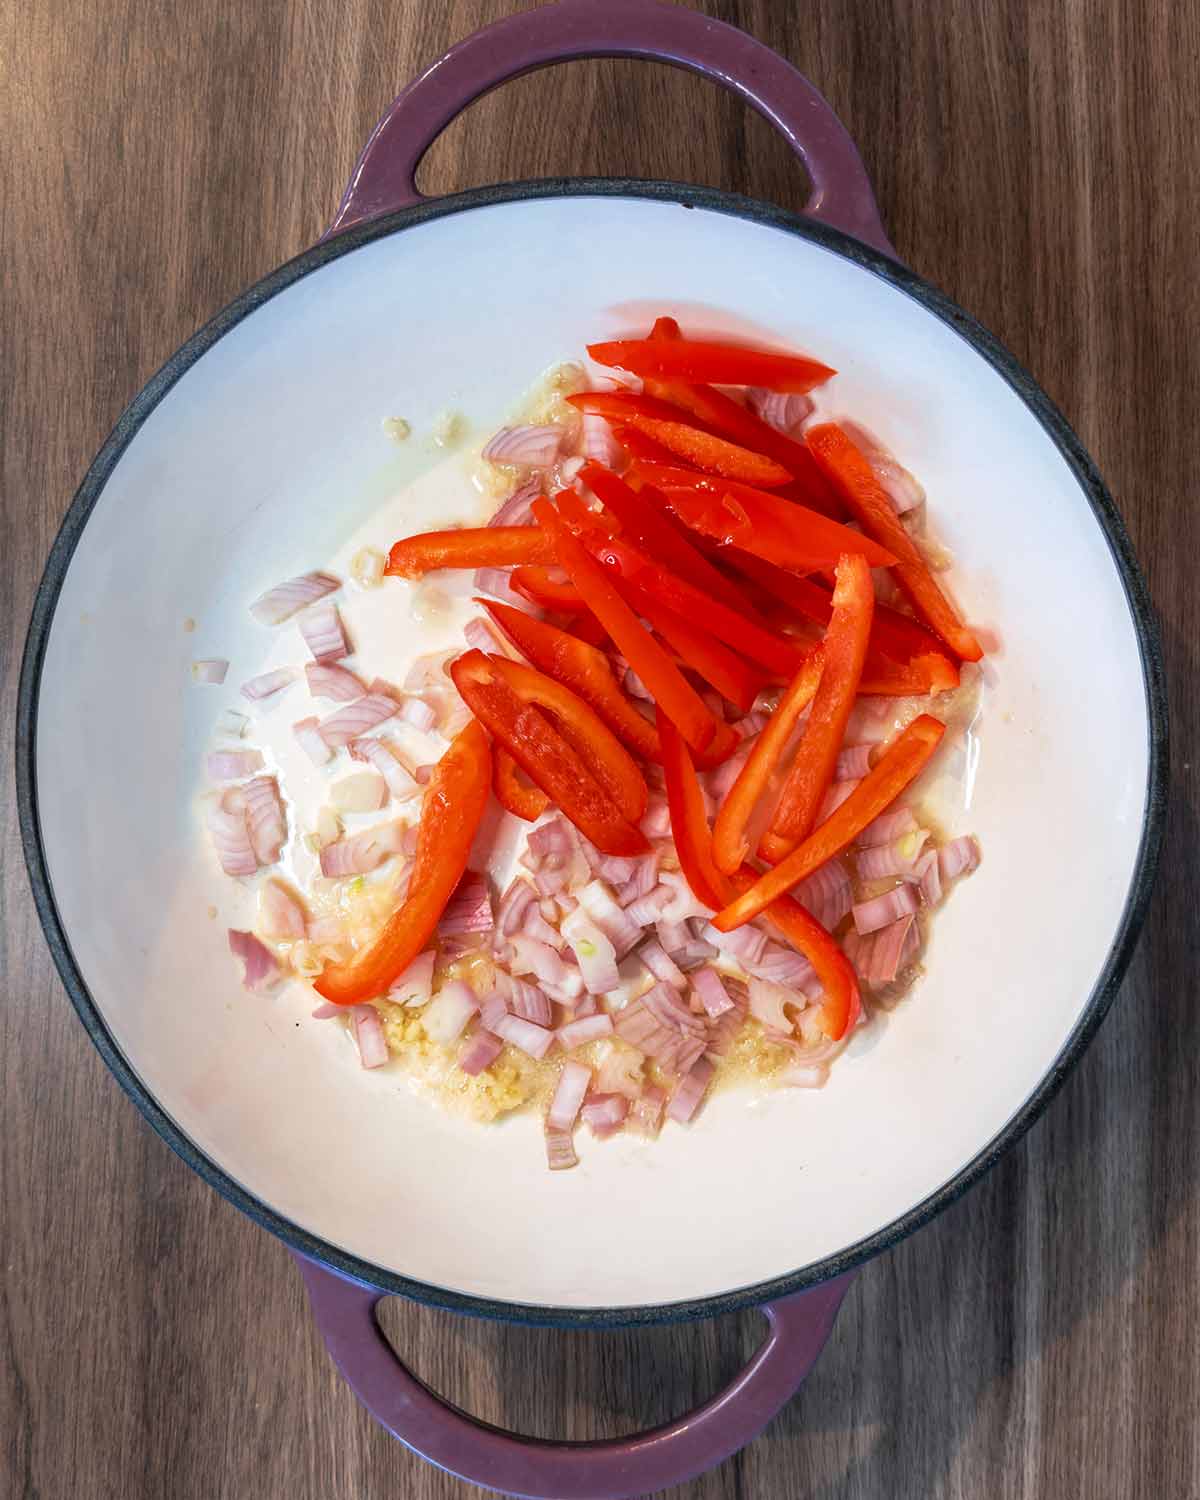 A large pan with chopped shallots and sliced red peppers cooking in it.